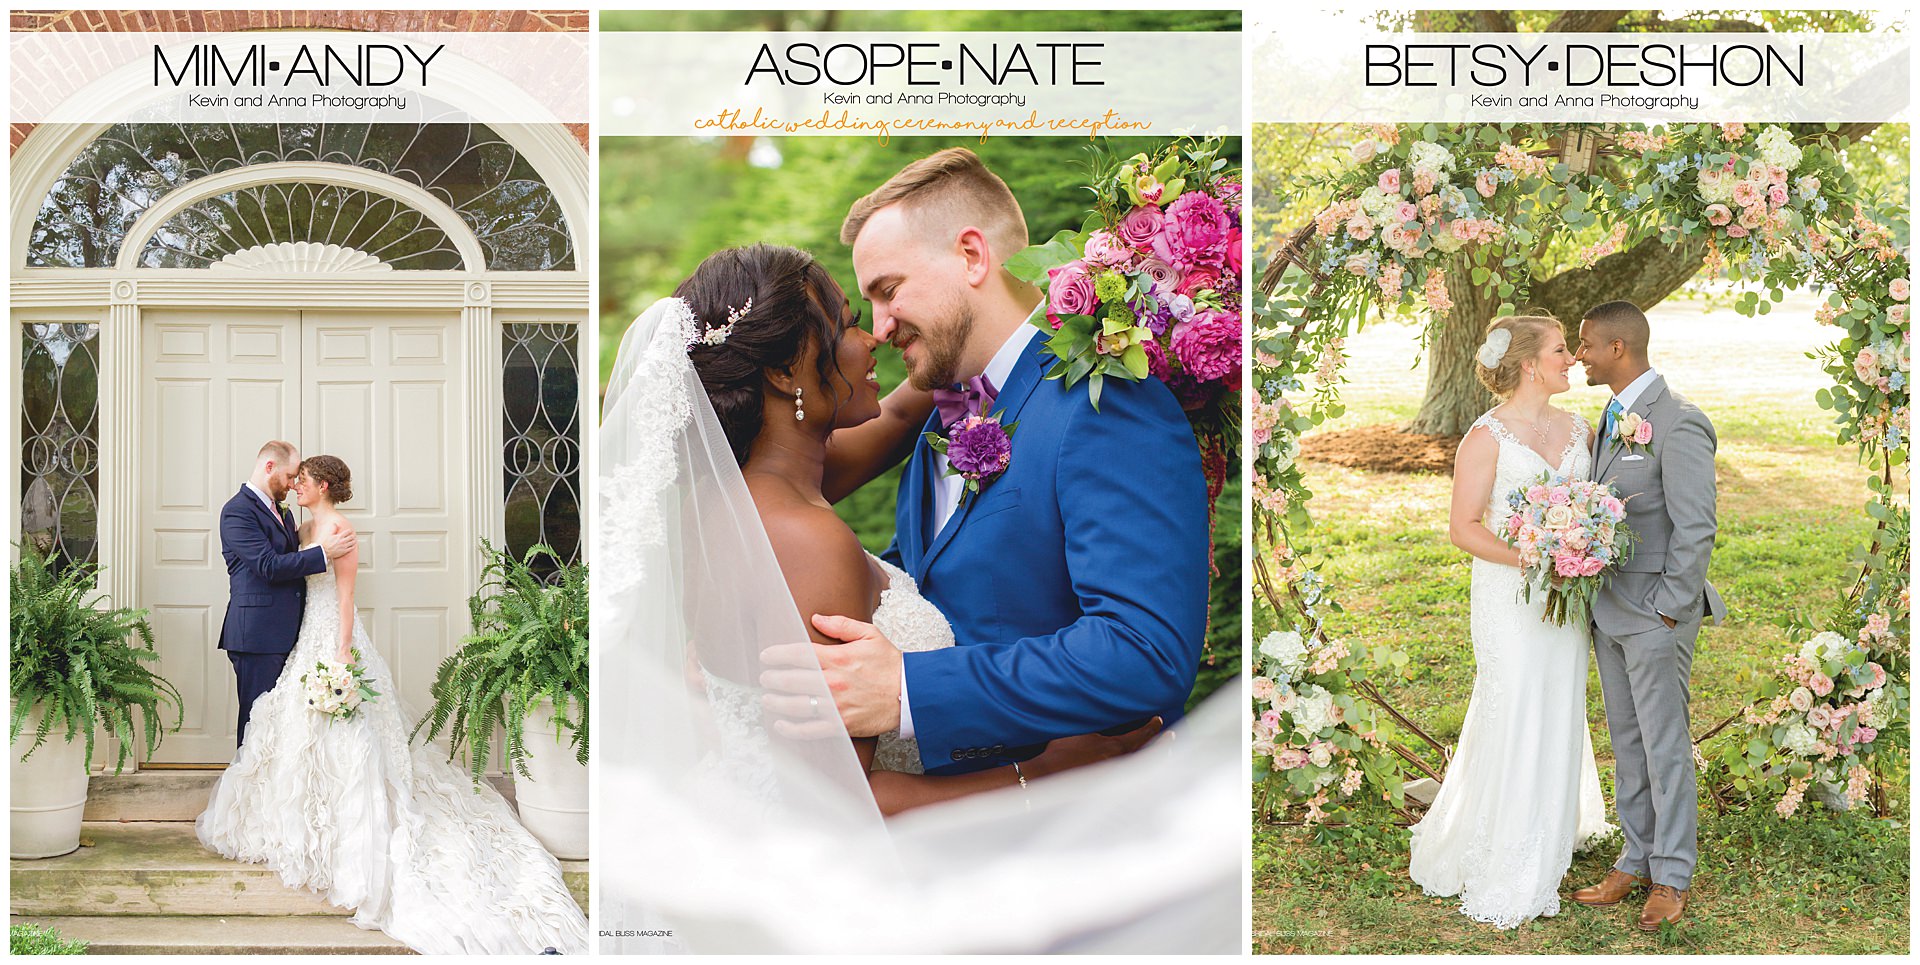 Lexington Kentucky Wedding Photographers Kevin and Anna Photography featured in Bridal Bliss Magazine